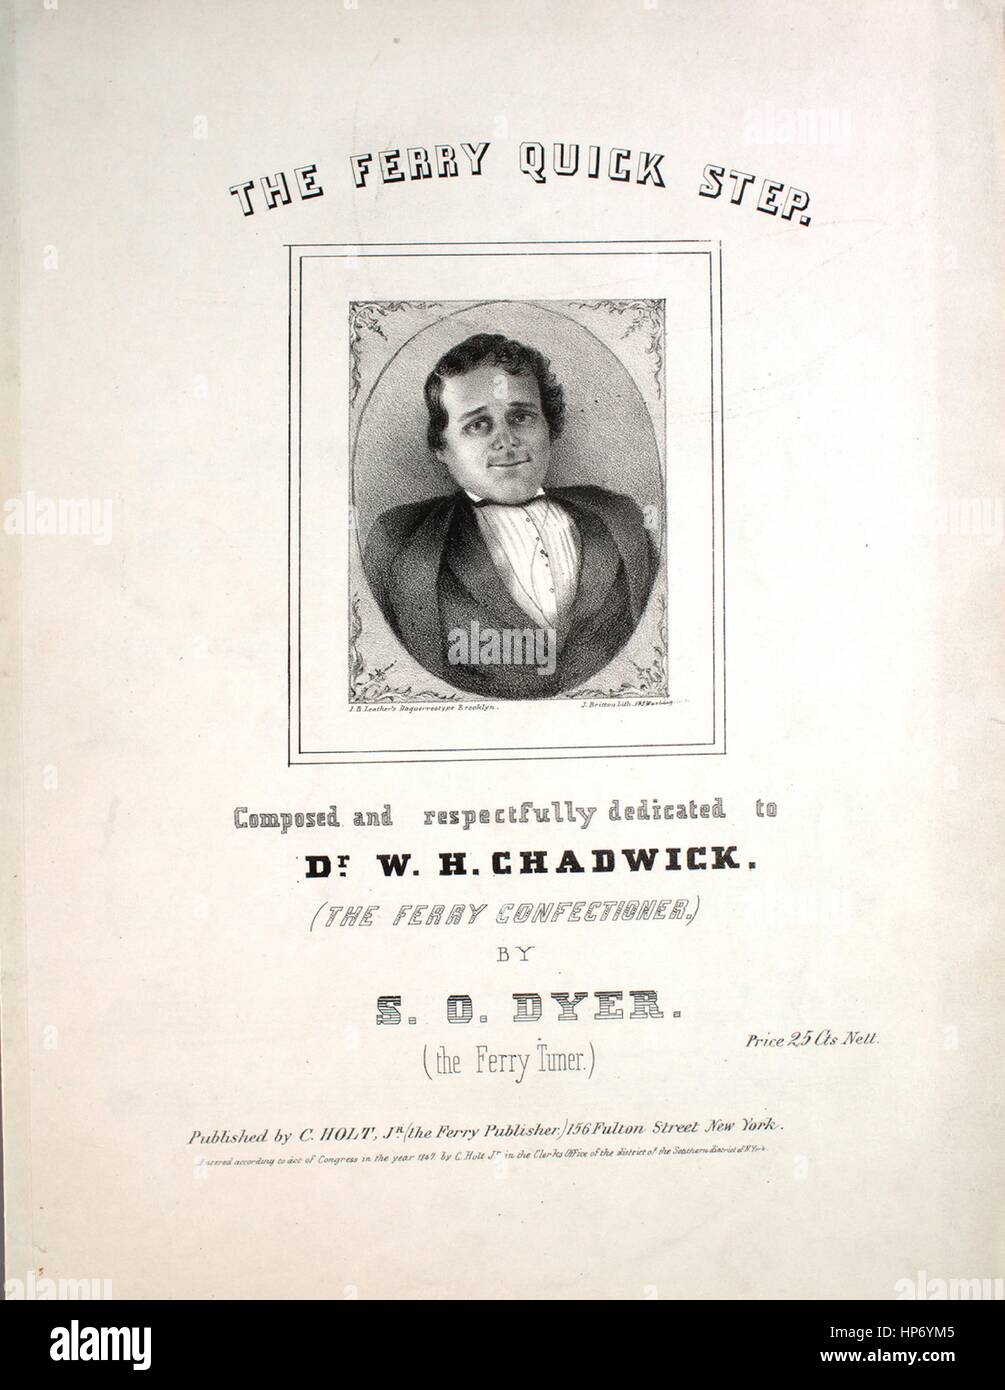 Sheet music cover image of the song 'The Ferry Quick Step', with original authorship notes reading 'Composed by SO Dyer (the Ferry Tuner)', United States, 1847. The publisher is listed as 'C. Holt, Jr. (The Ferry Publisher), 156 Fulton Street', the form of composition is 'sectional', the instrumentation is 'piano', the first line reads 'None', and the illustration artist is listed as 'J.B. Leather's Daguerreotype Brooklyn; J. Britton Lith. 559 Washington; G.W. Ackerman Engr. and Prnr.'. Stock Photo